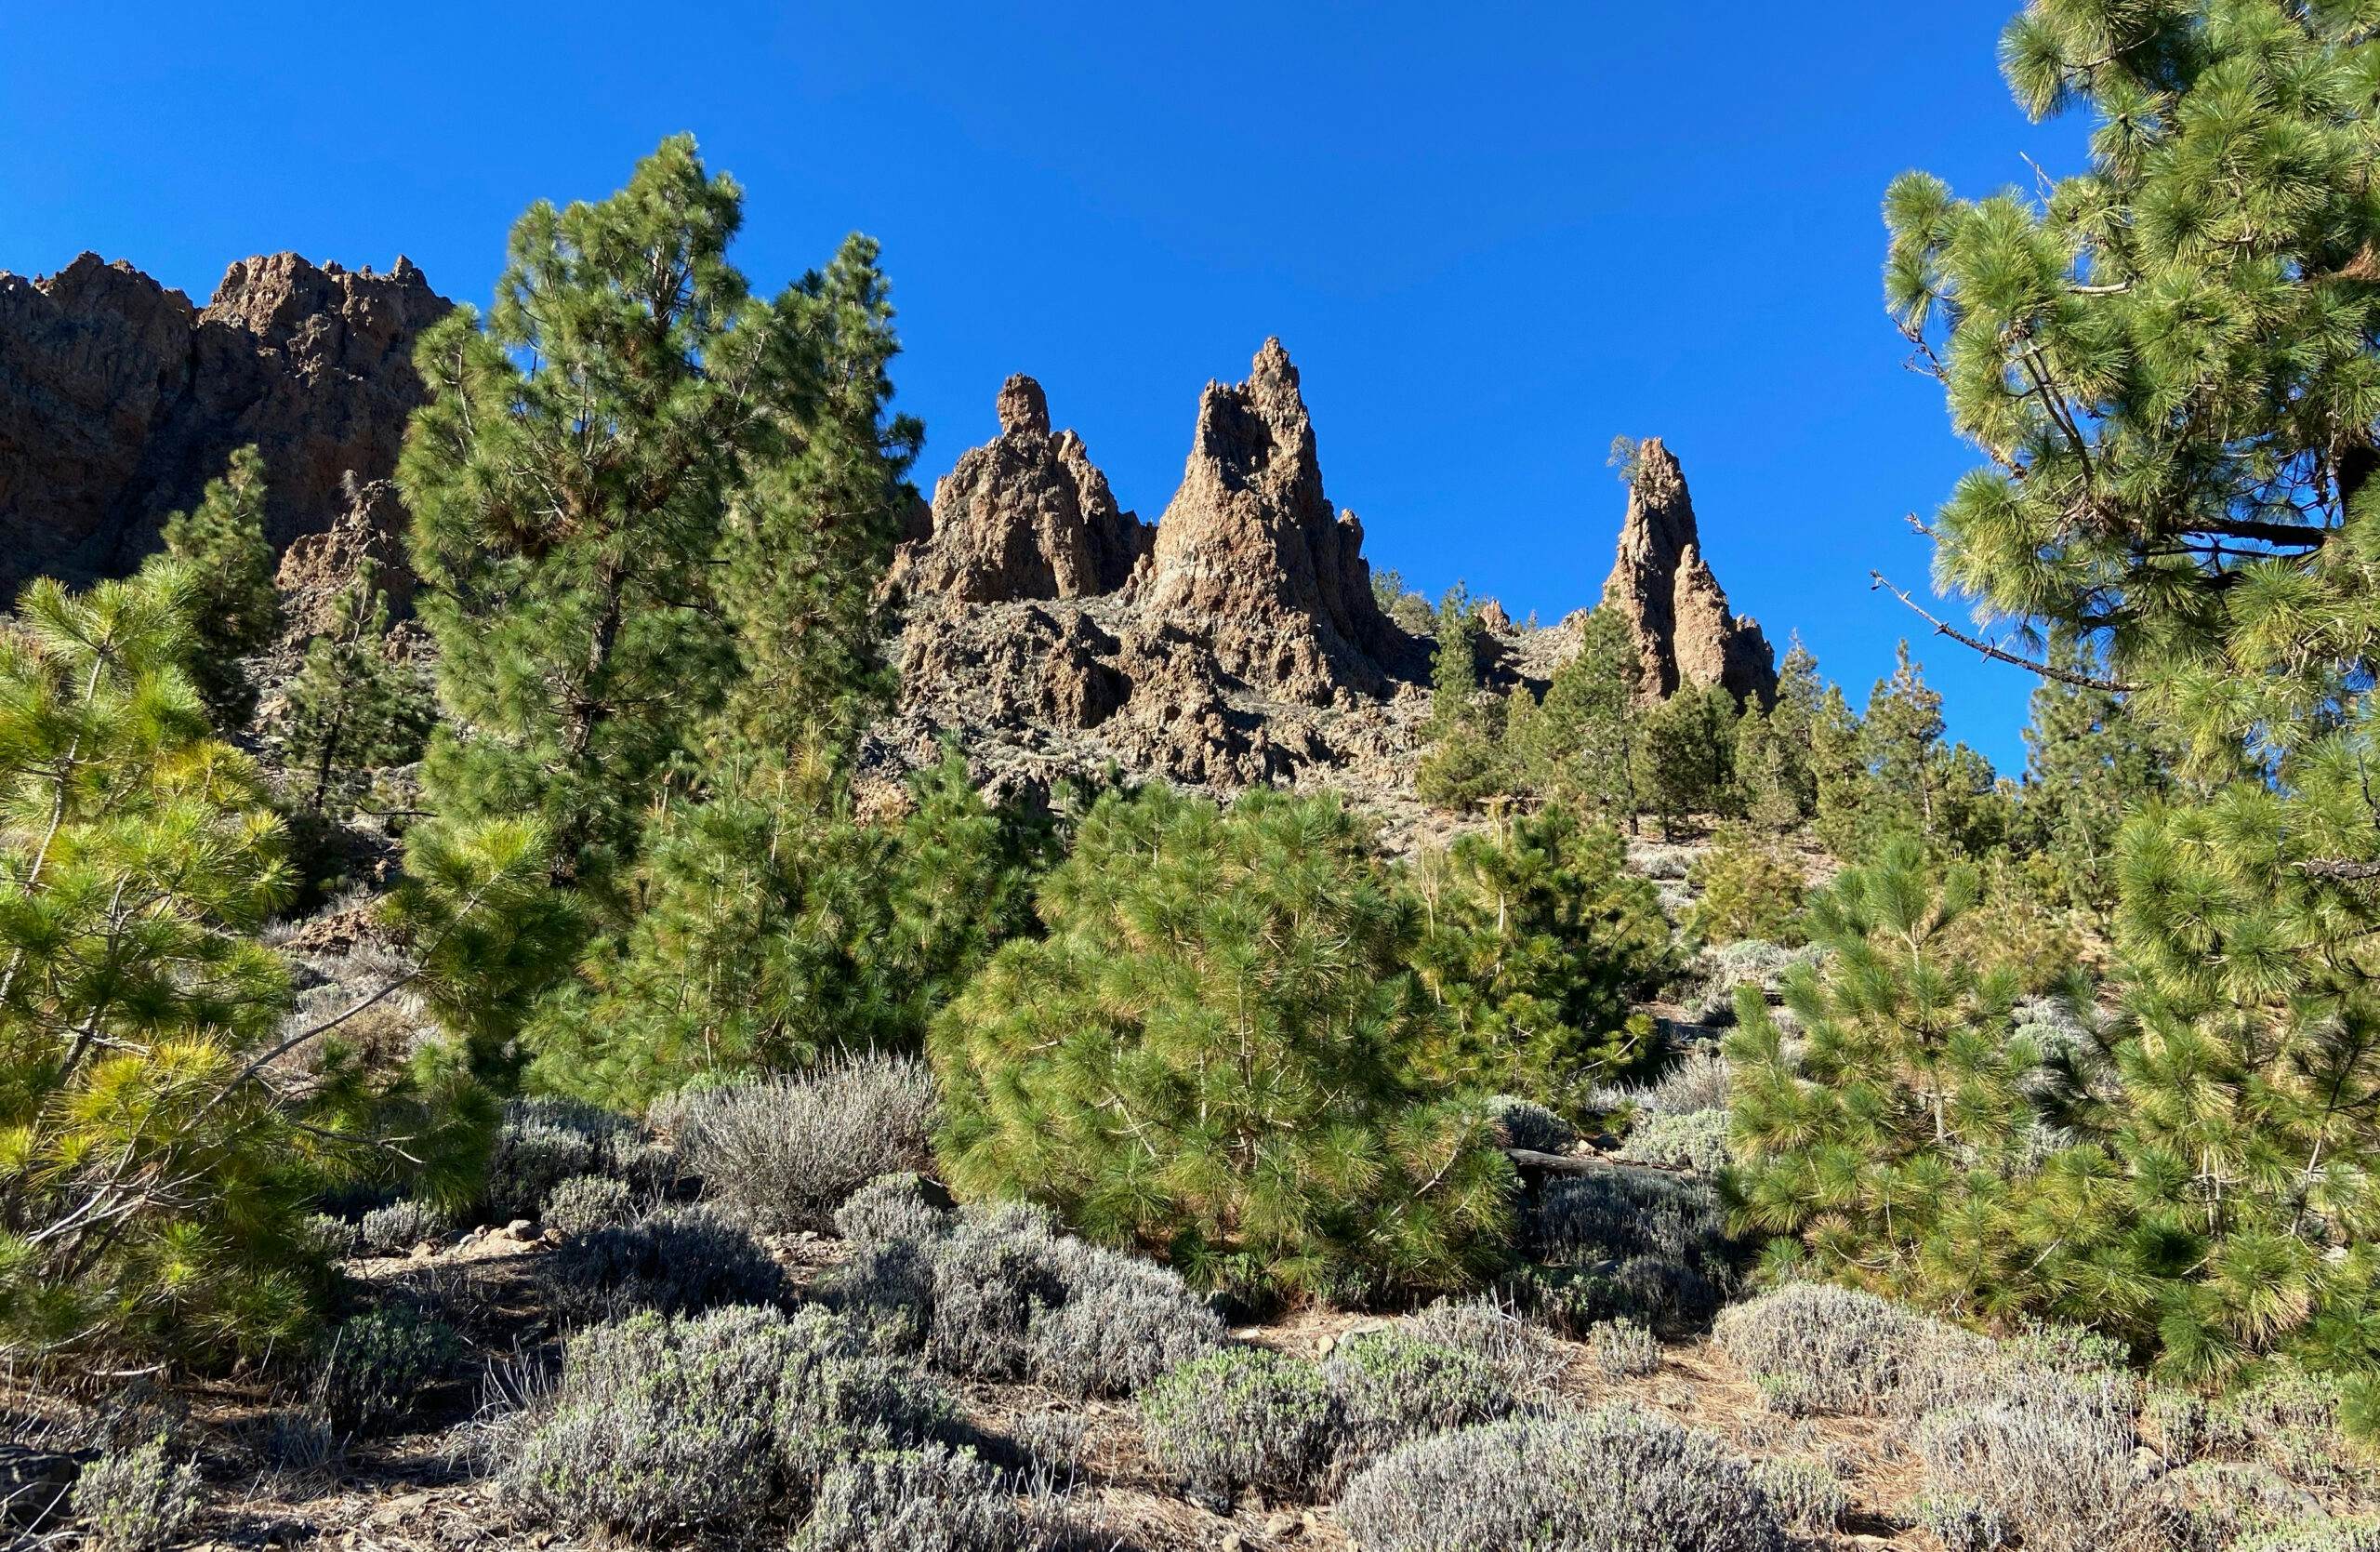 Green pines, jagged rocks and blue skies in the national park